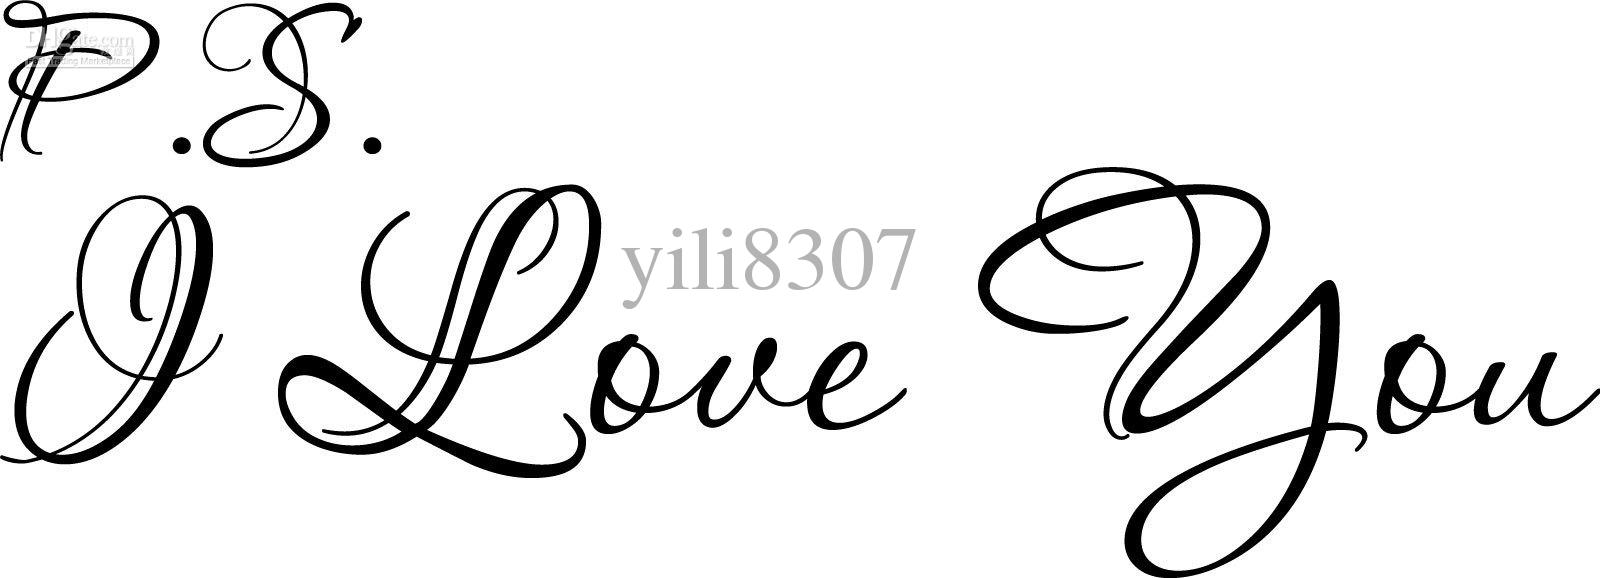 Wholesale   P S  I Love You Cute Cursive Vinyl Wall Decal Quote    